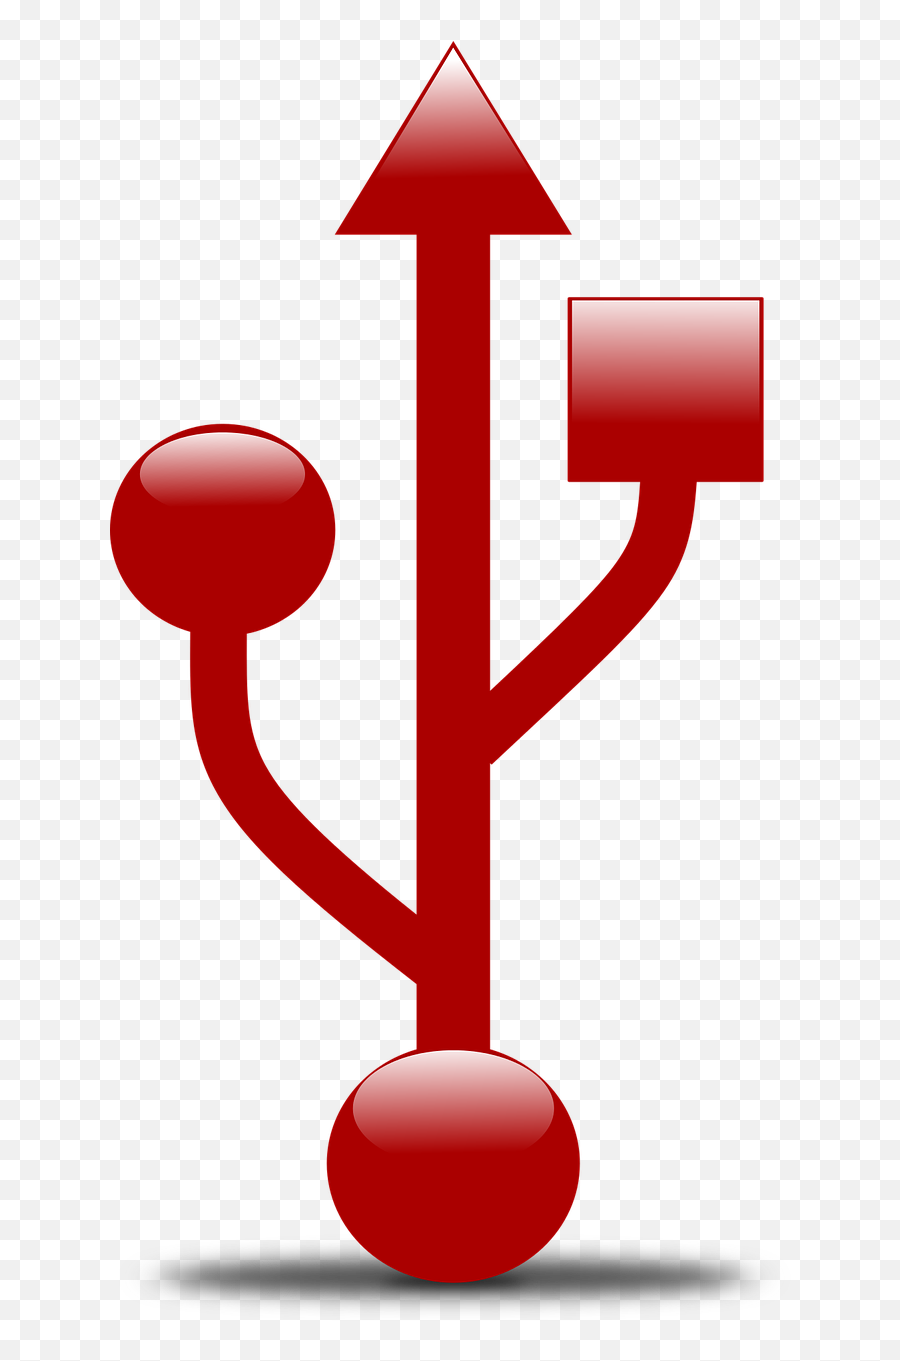 Usb Symbol Computers - Free Vector Graphic On Pixabay Usb Logo Png,Power Supply Icon